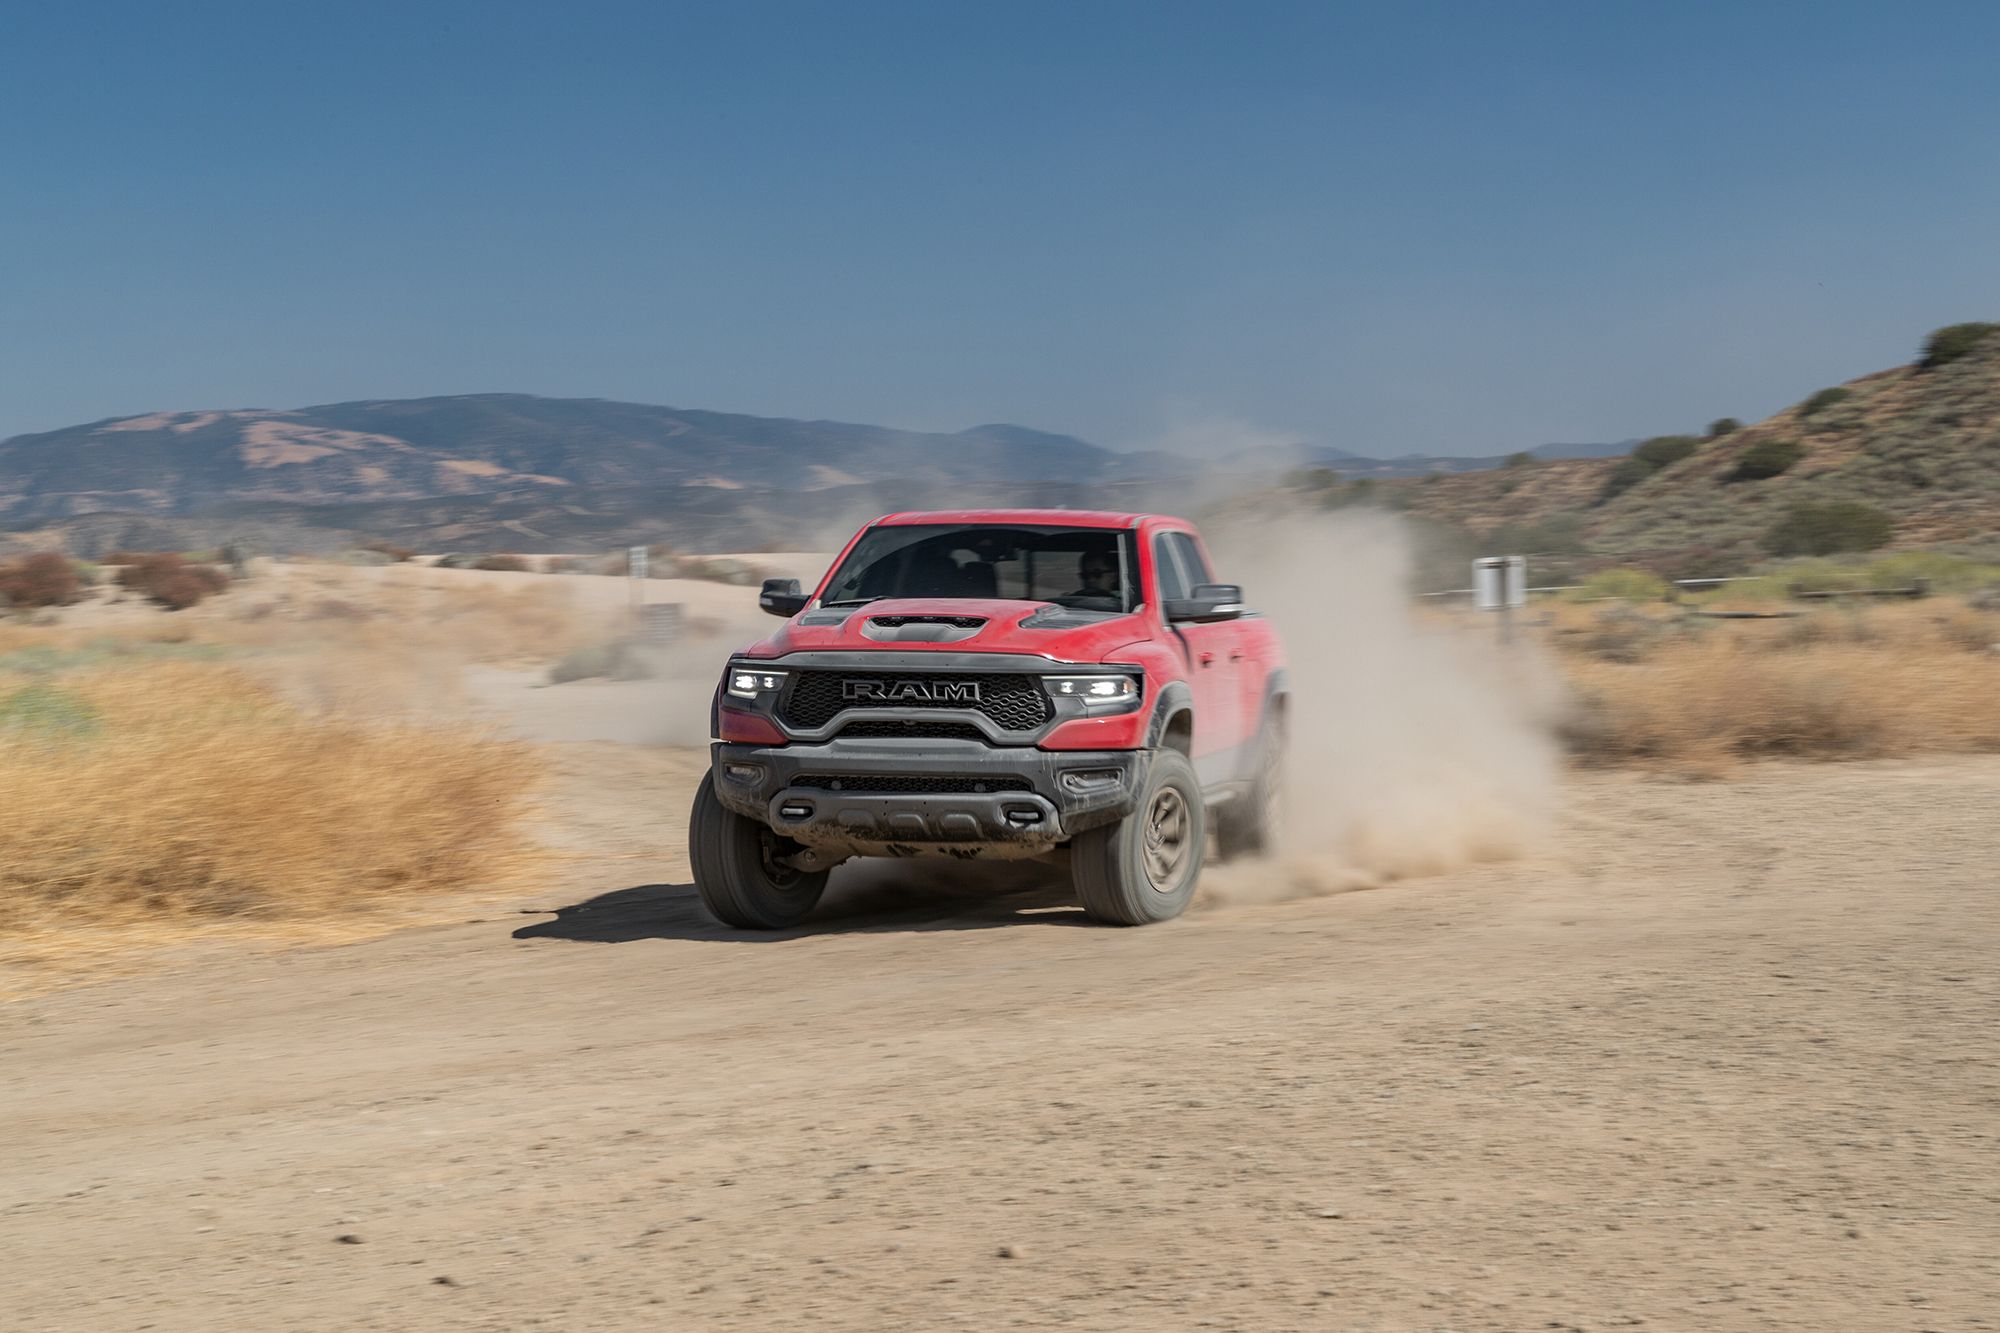 2020 Ram 1500 Prices, Reviews, and Photos - MotorTrend